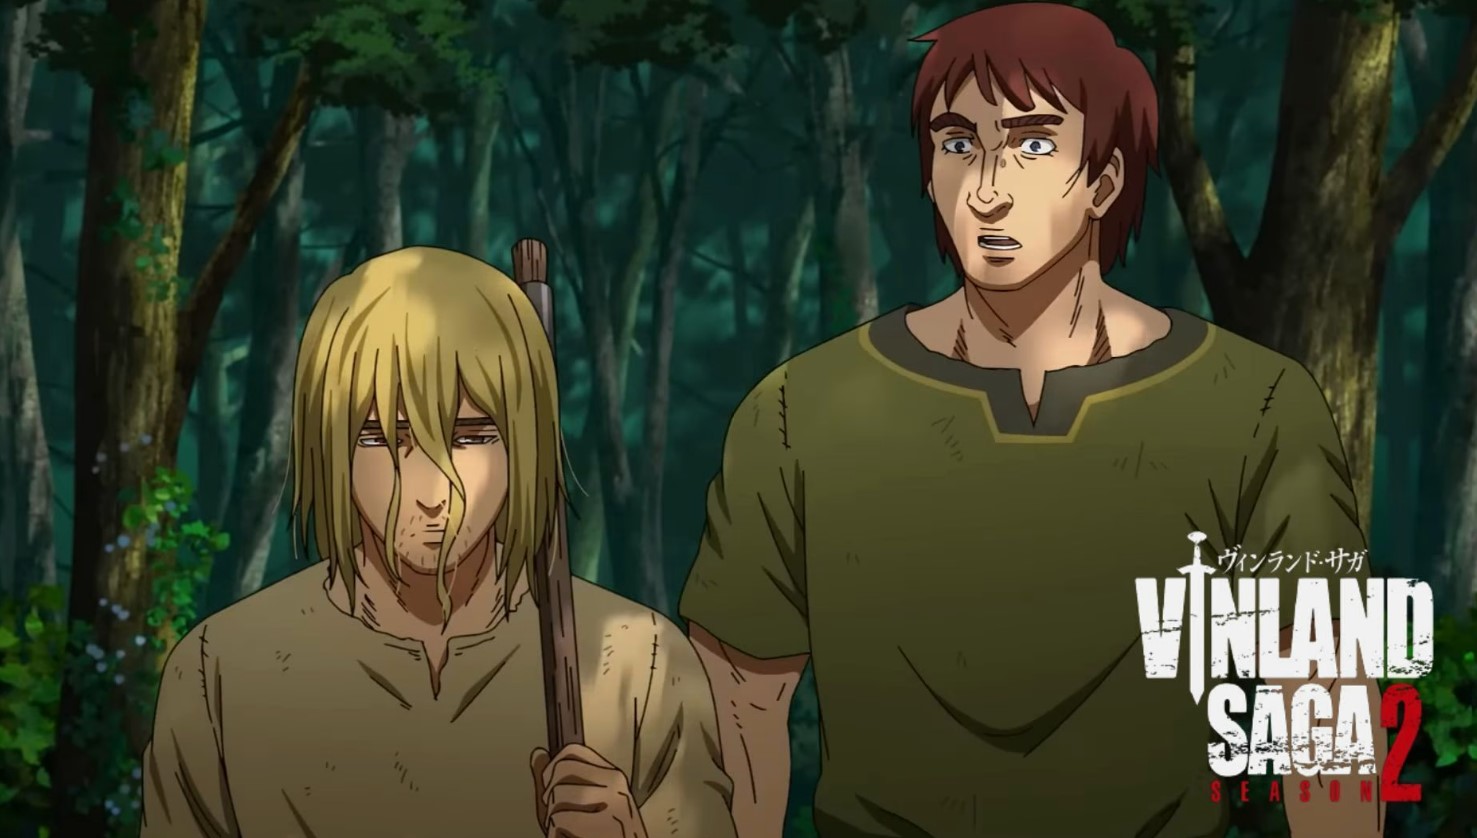 Vinland Saga Season 2 Release Date Confirmed with New Trailer - The Teal  Mango